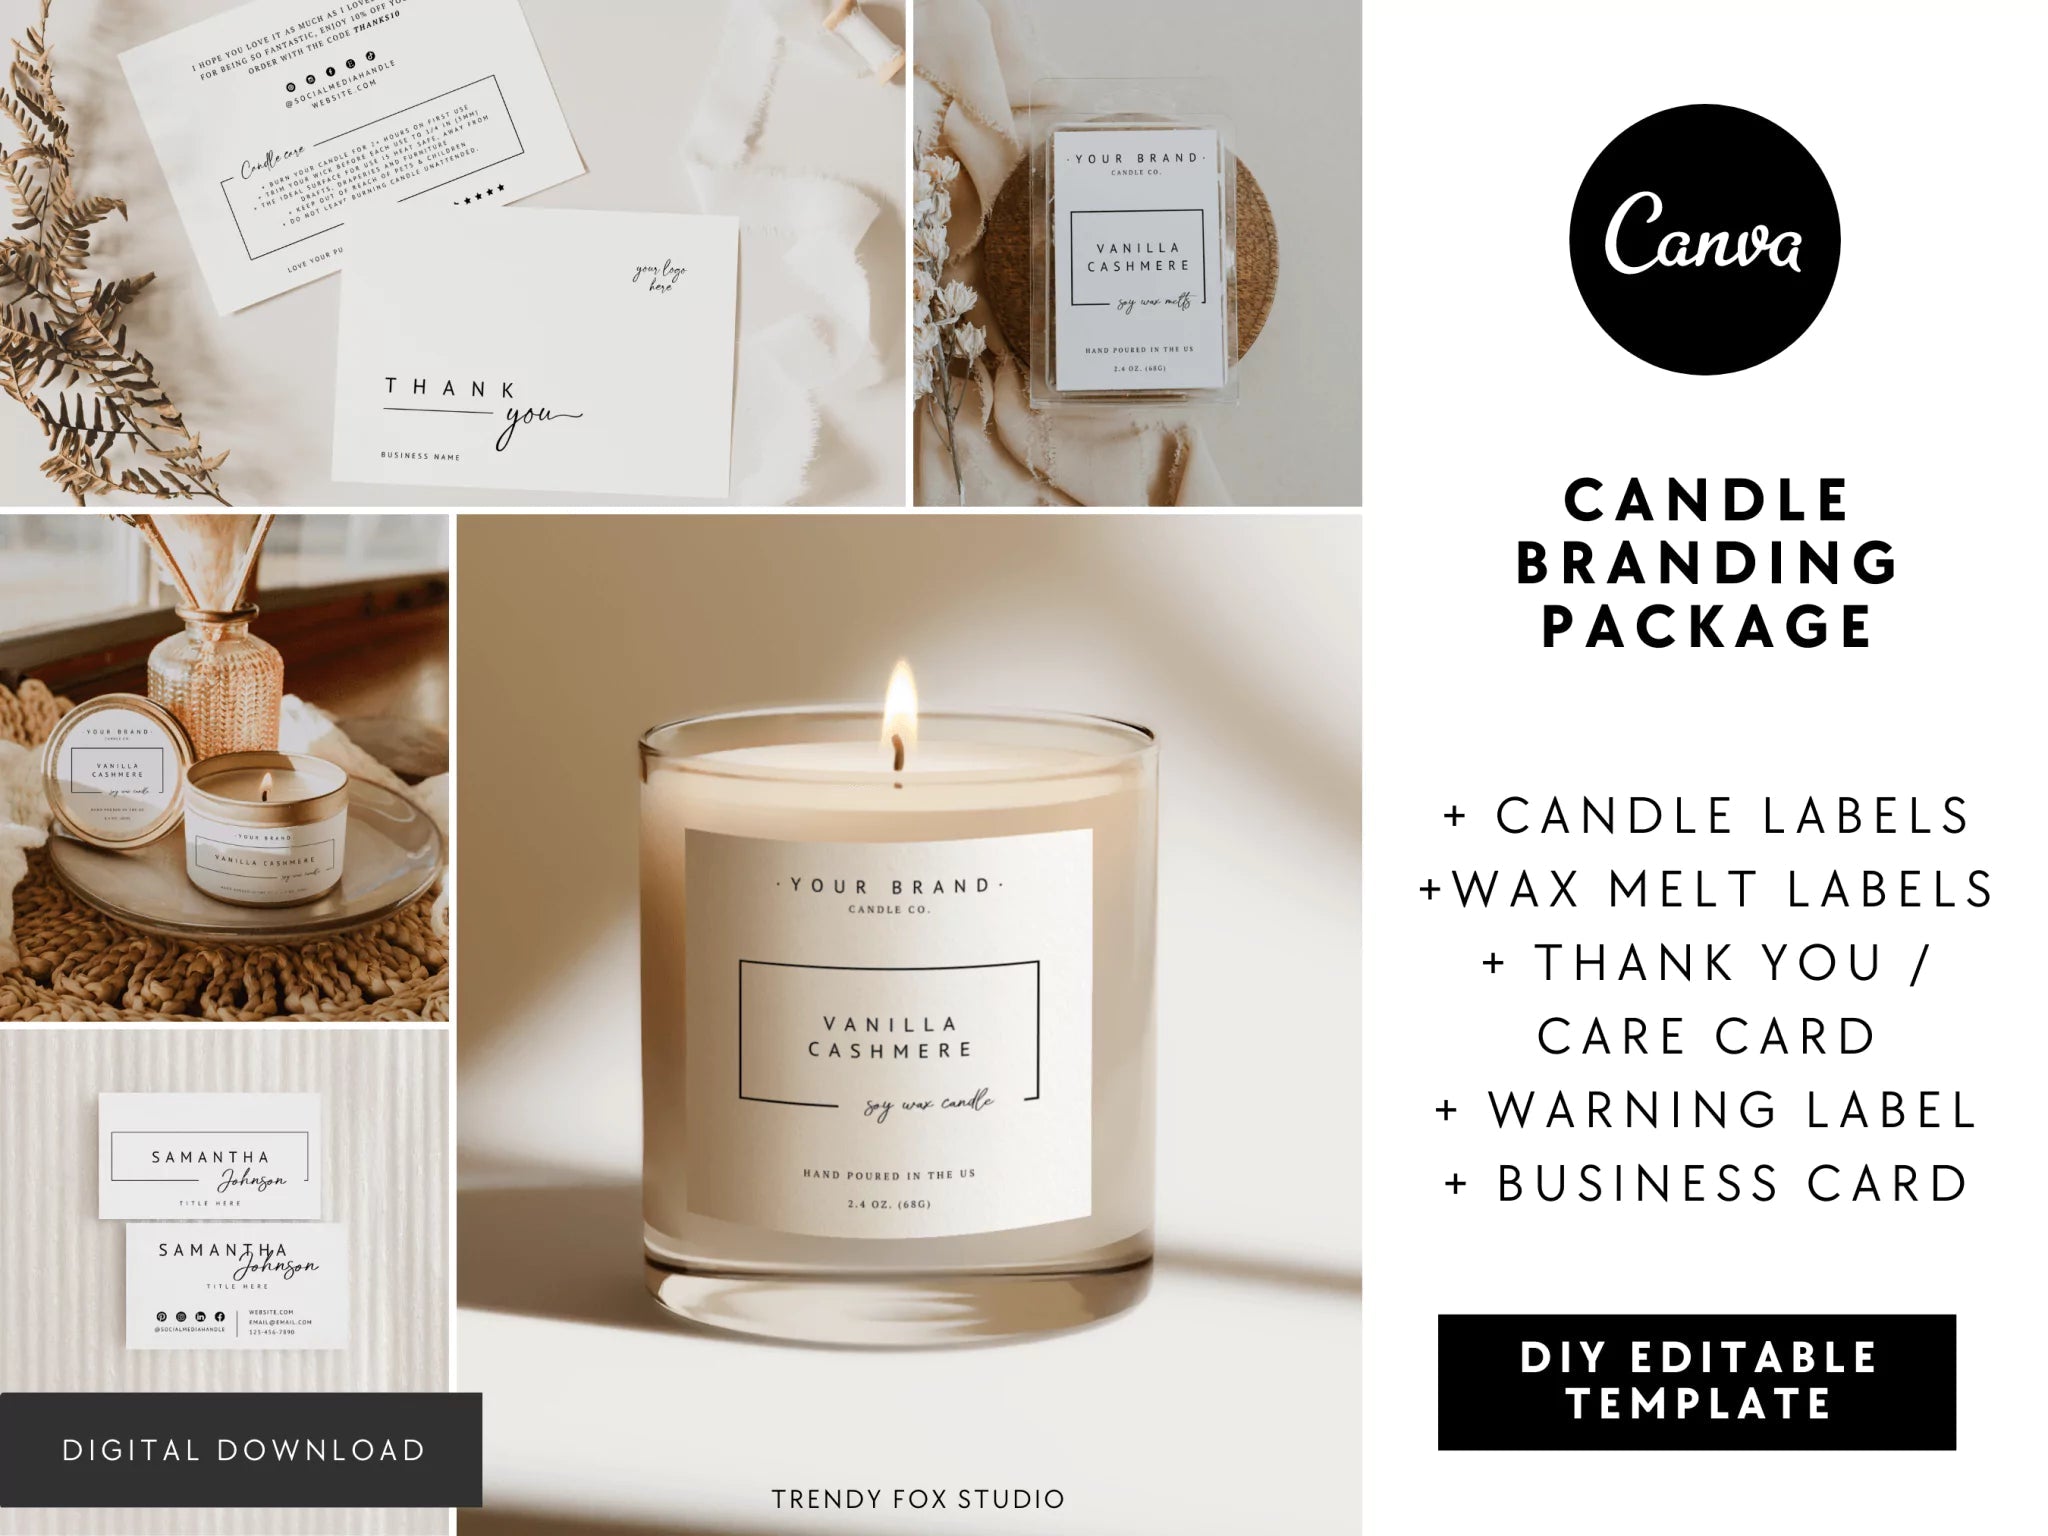 Candle Label Design Gallery - Free Candle Templates, Avery